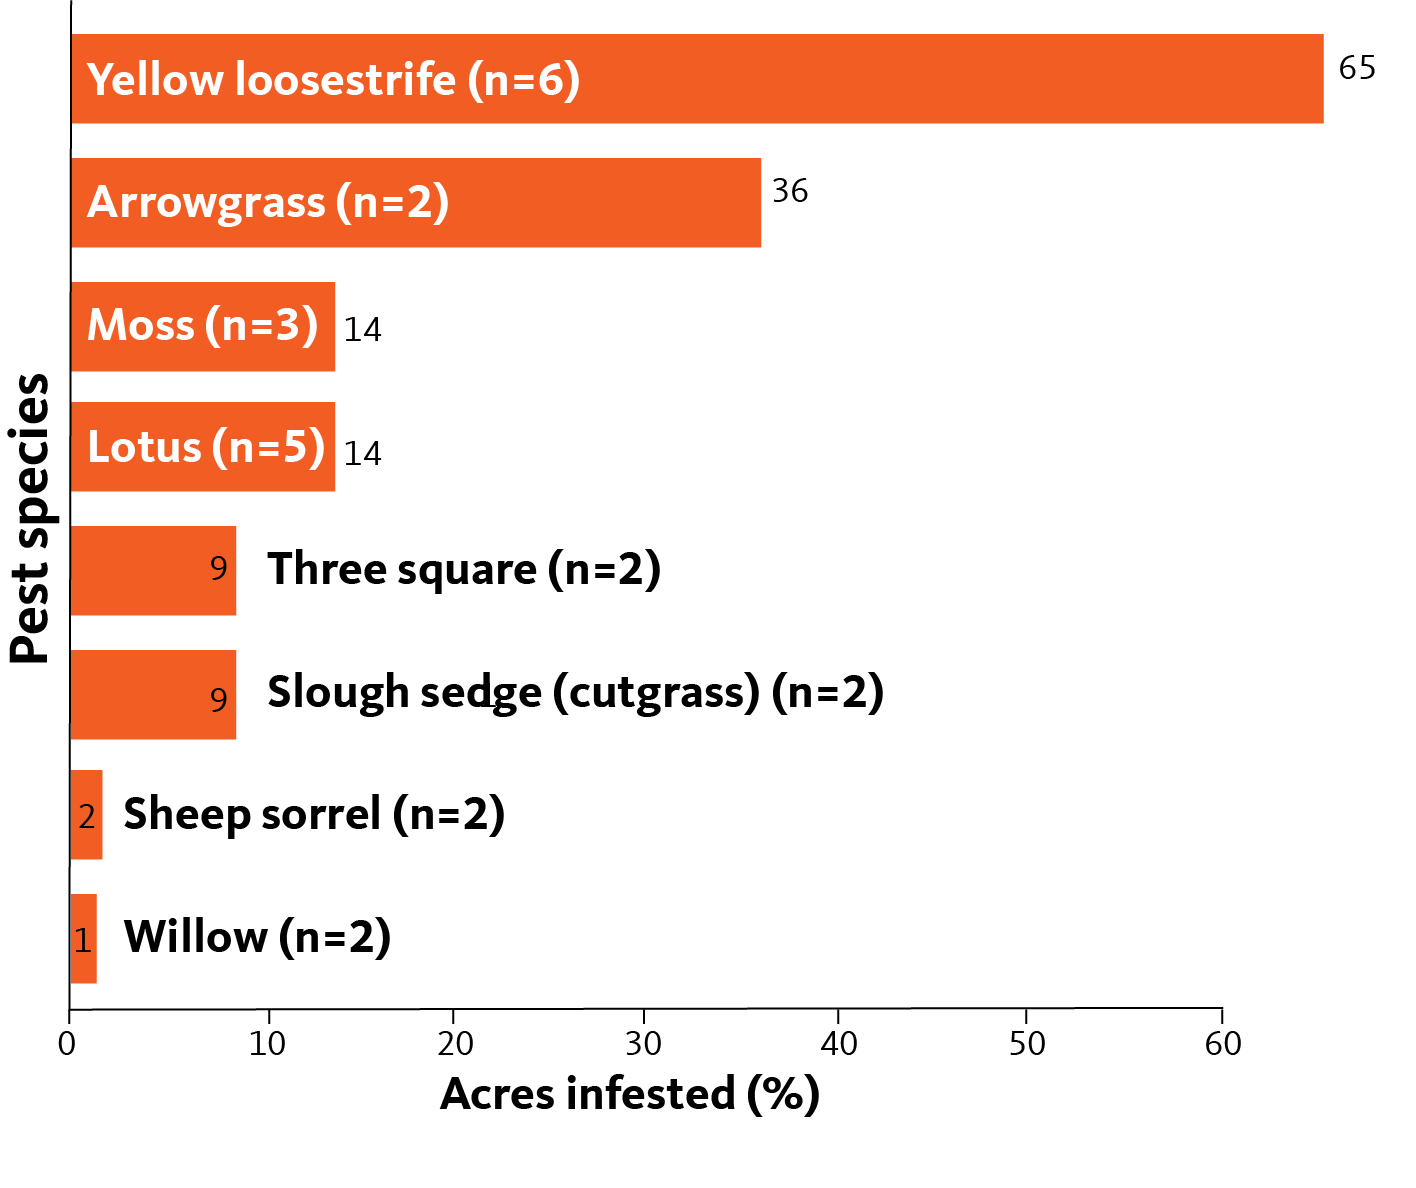 bar chart showing yellow loosestrife top weed